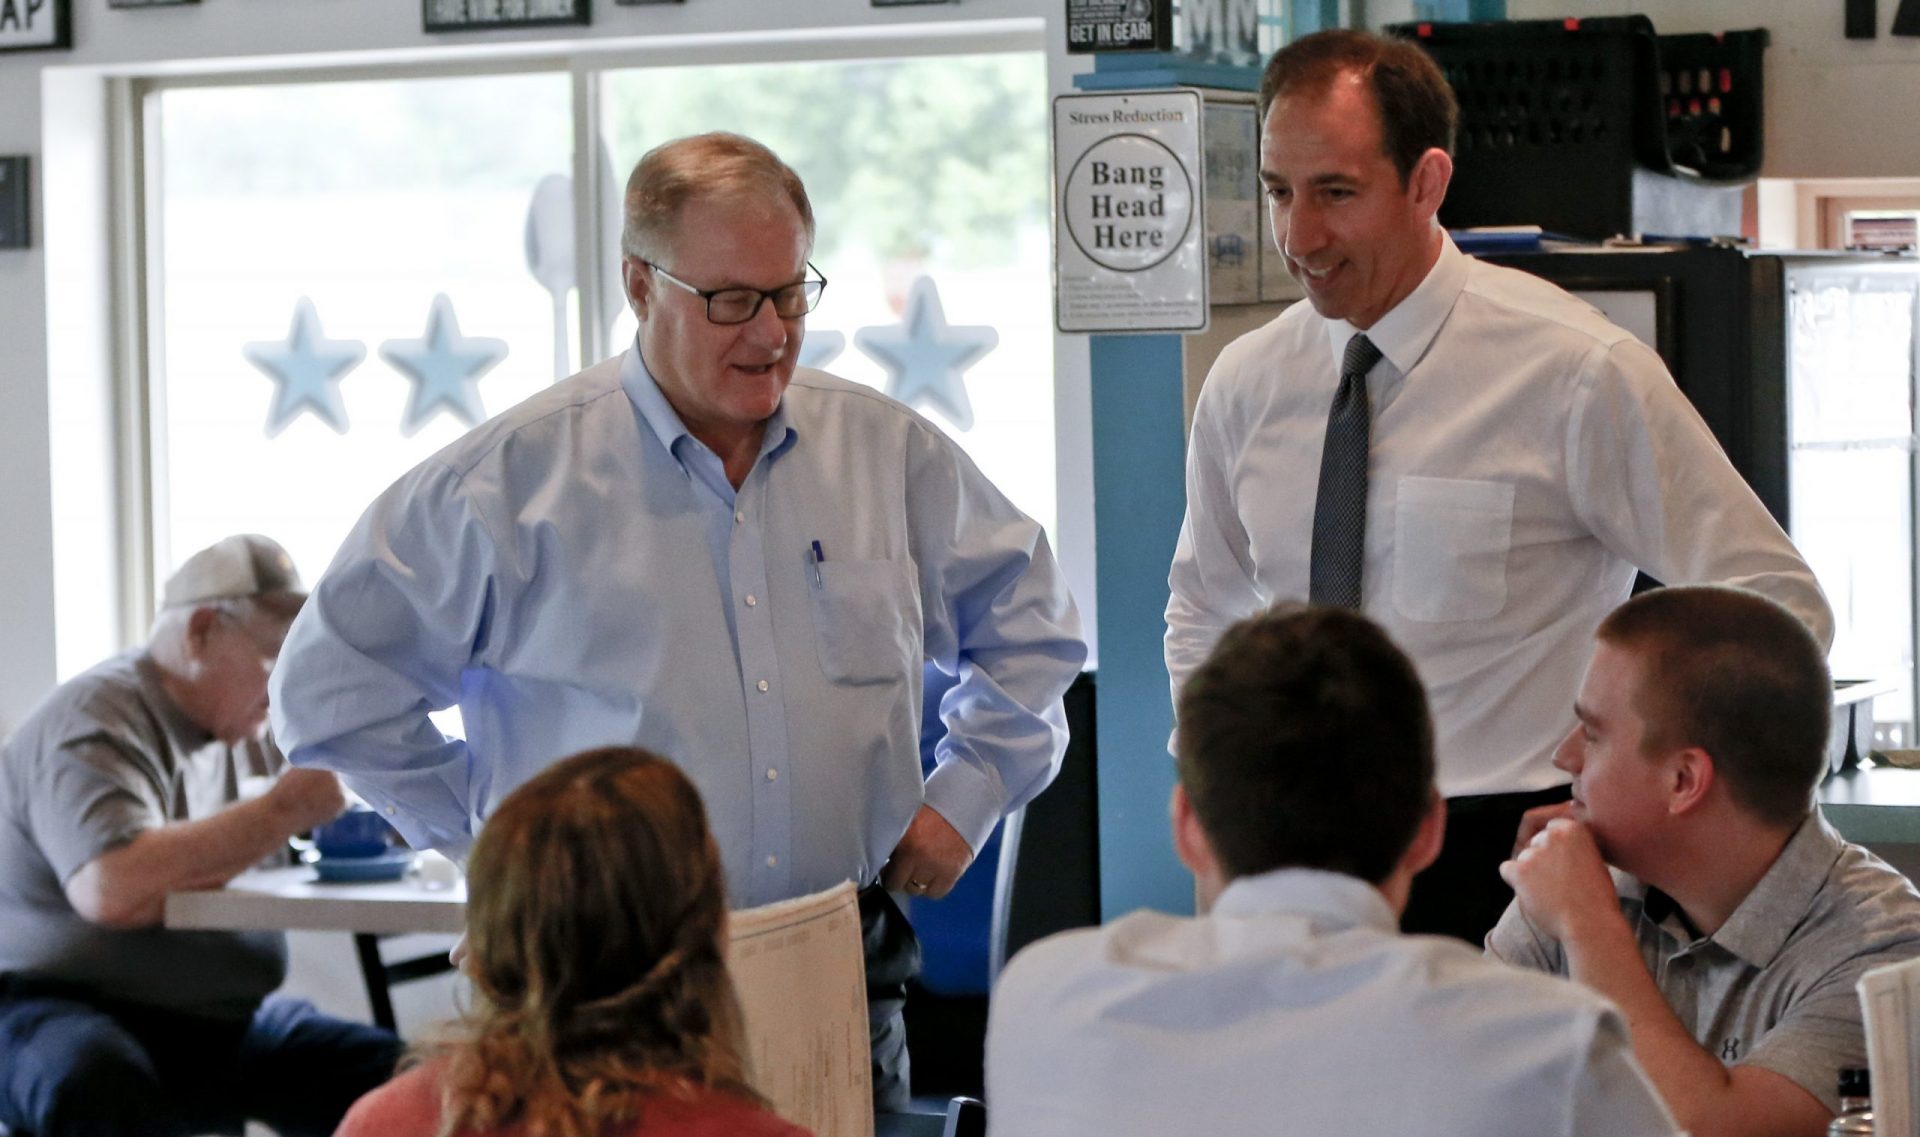 Scott Wagner, left, Republican candidate for Pennsylvania Governor, and lieutenant governor candidate Jeff Bartos, right, campaign at a diner in Imperial, Pa. Monday, May 14, 2018 , the day before the Pennsylvania primary where he faces two other Republicans, Paul Mango and Laura Ellsworth.